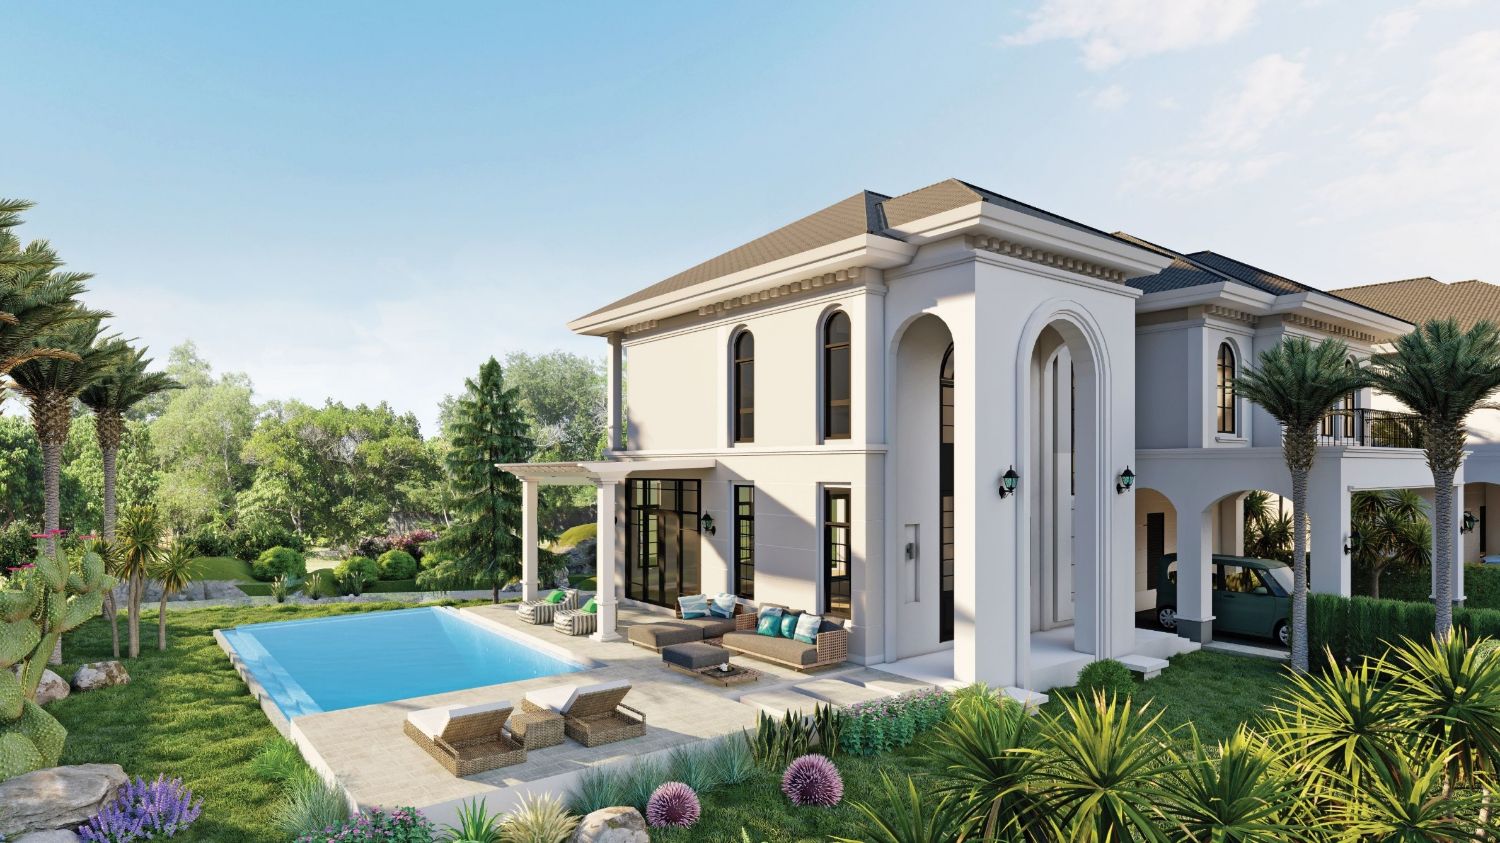 THE ELEGANT POOL VILLA BY THE NATURE FOR SALES